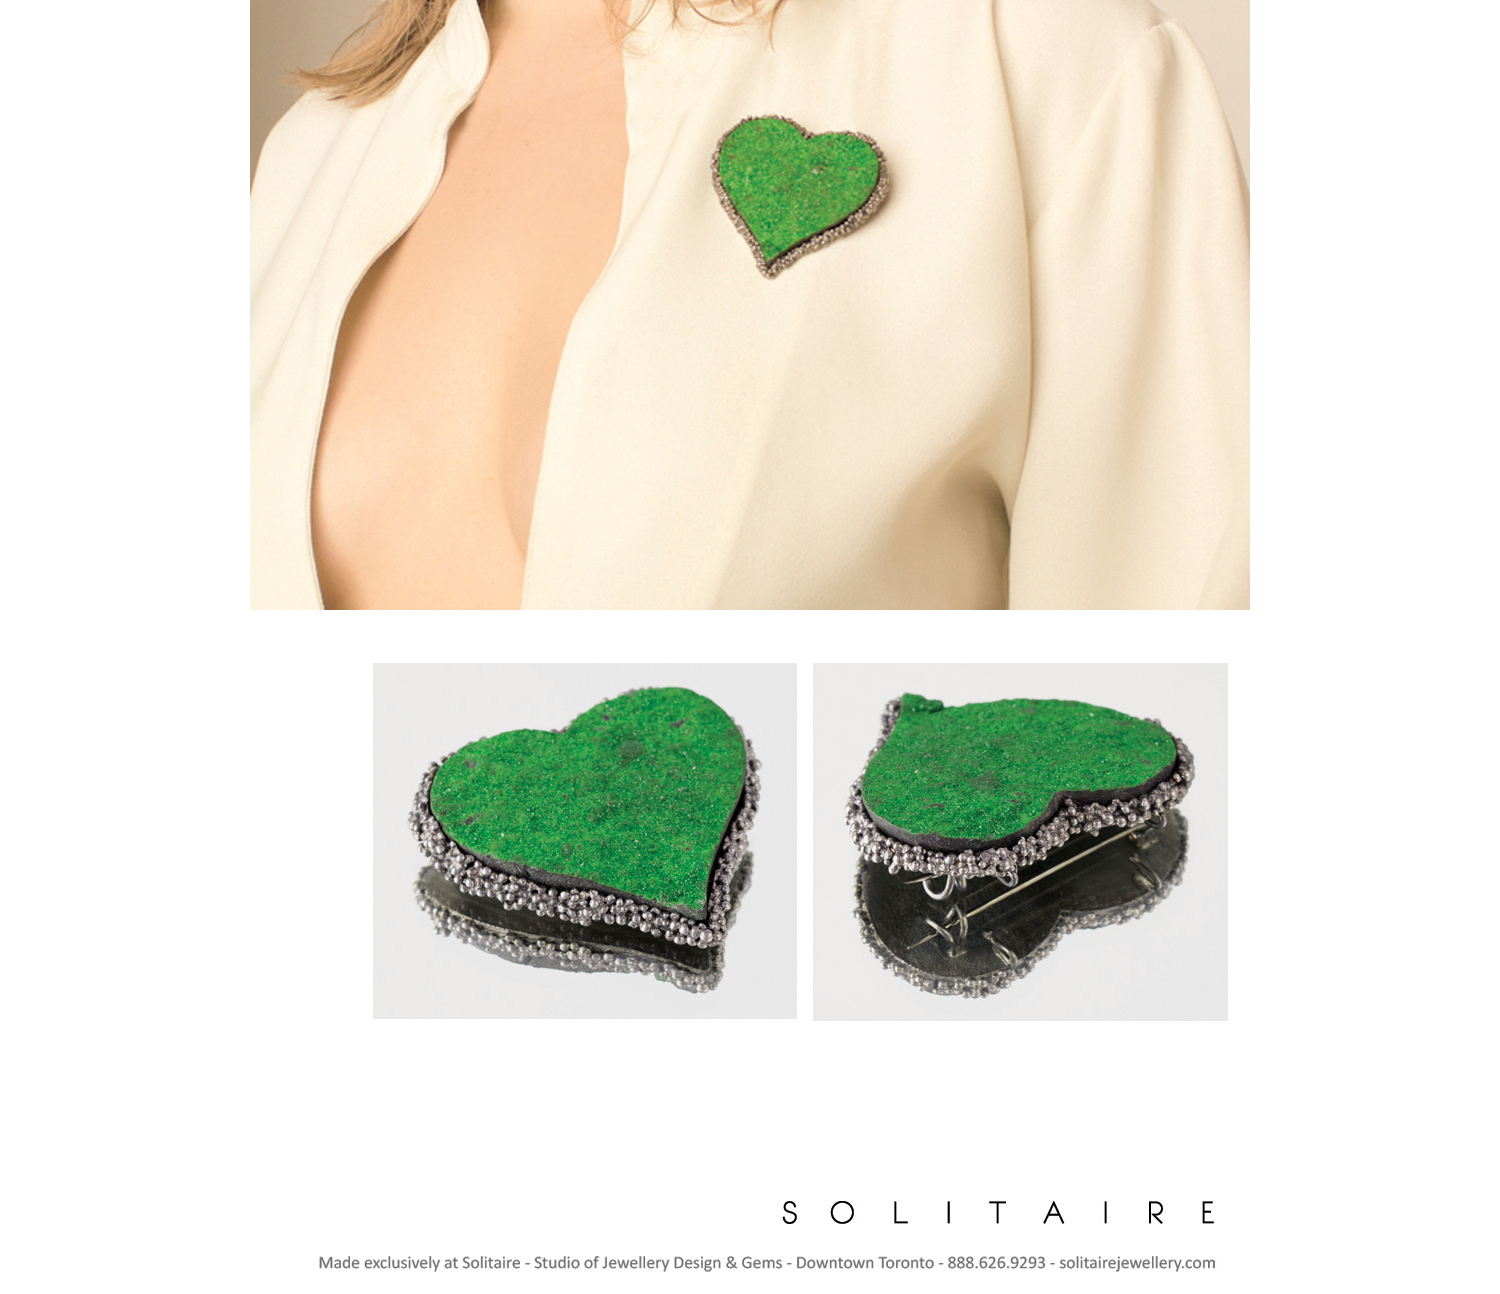 Heart Brooche by Alex Armen: Muse & Fame Collection available only on Solitaire Jewellery's Online Shop